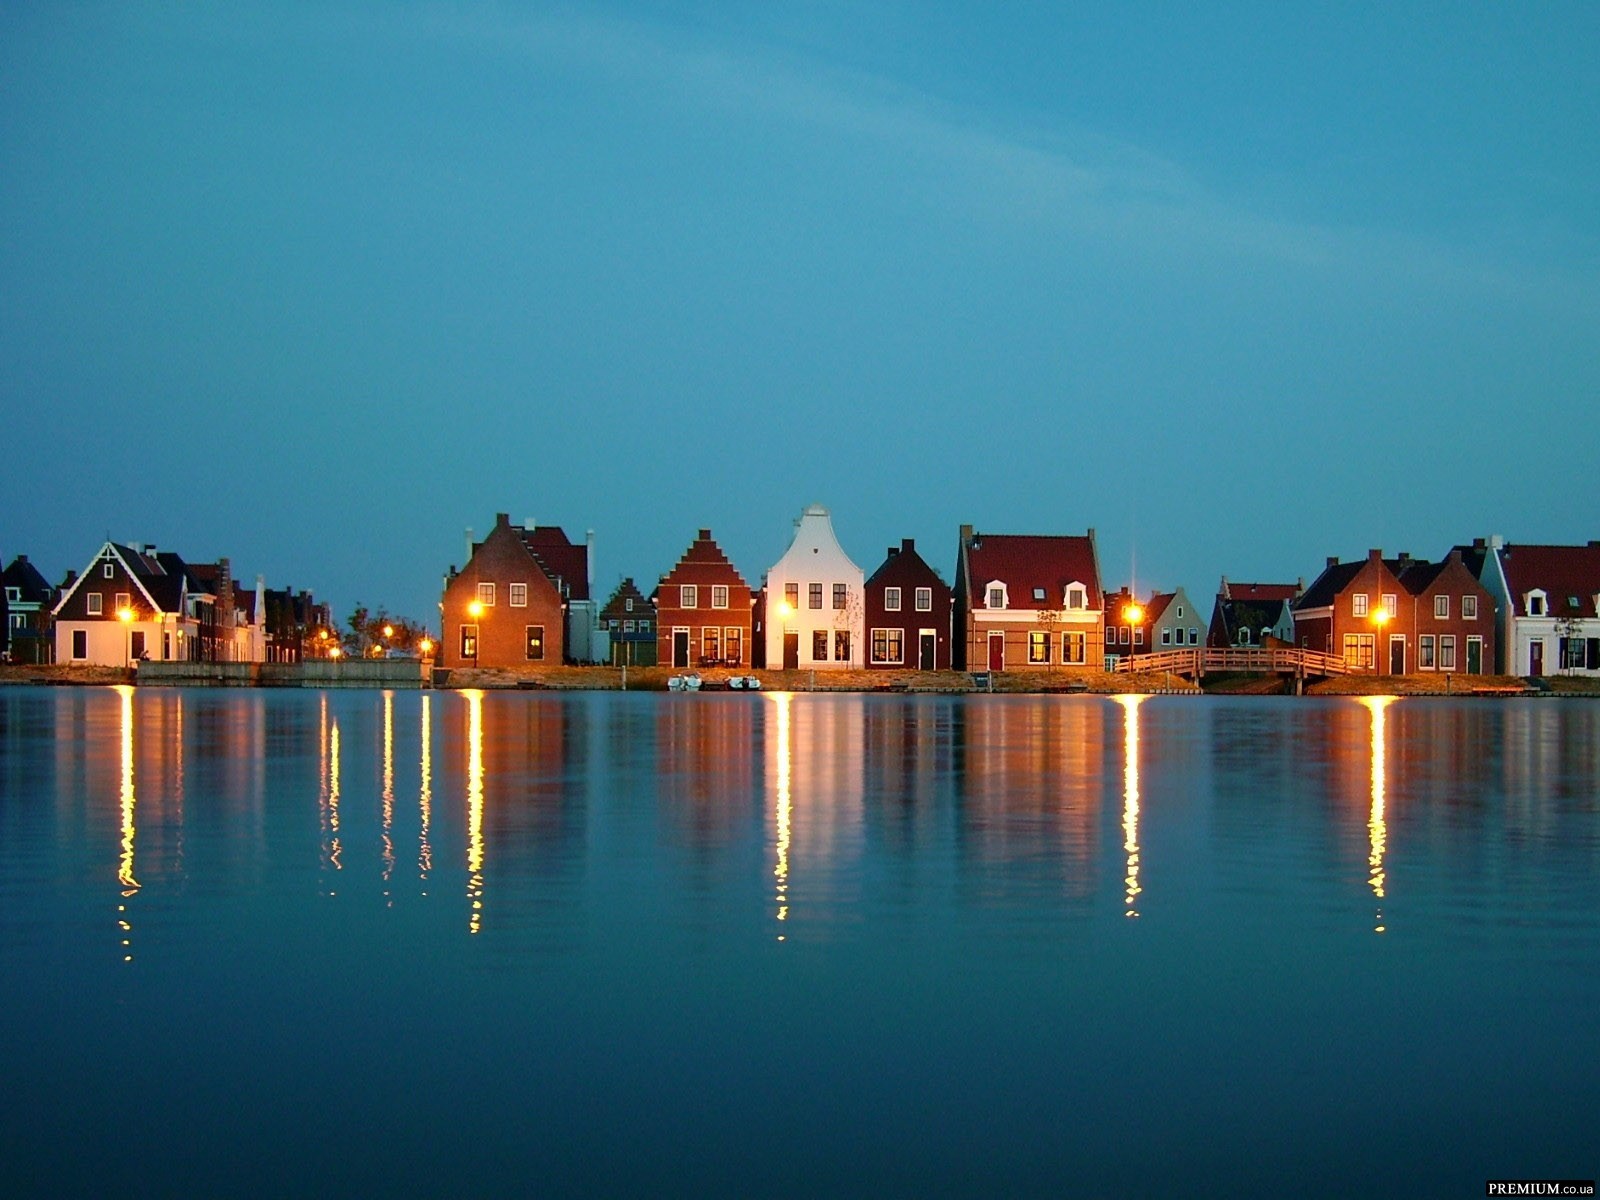 General 1600x1200 lake village evening lights house water reflection blue